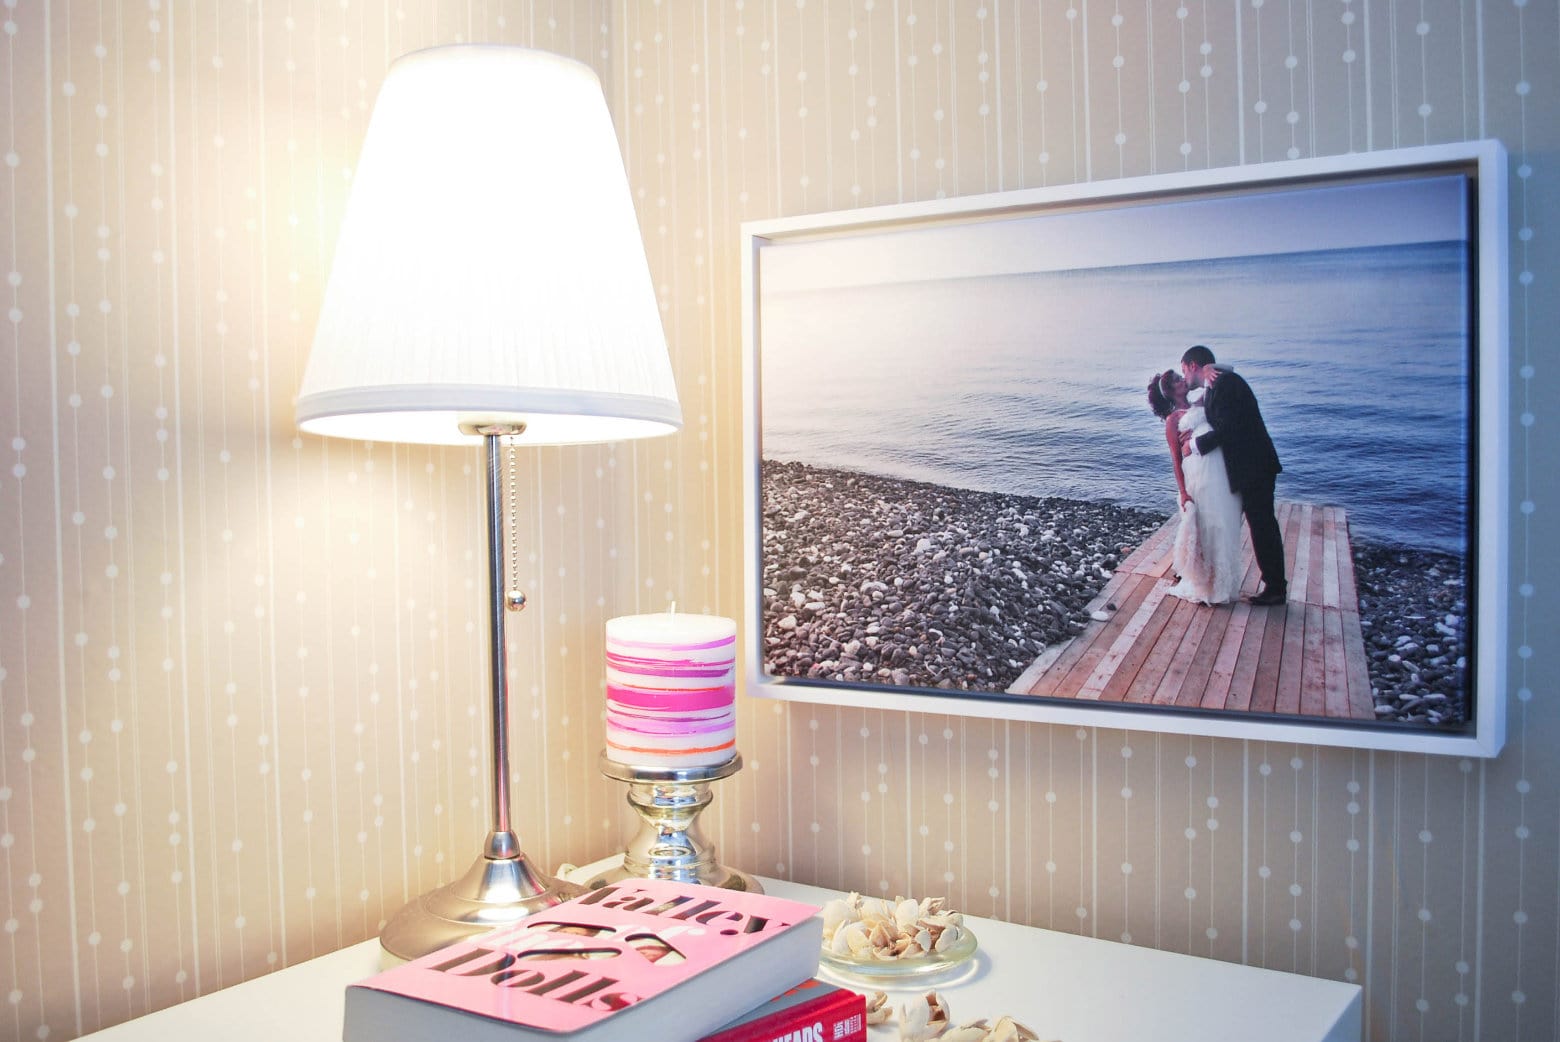 Wedding Photo Printed on Canvas and Displayed in the Bedroom